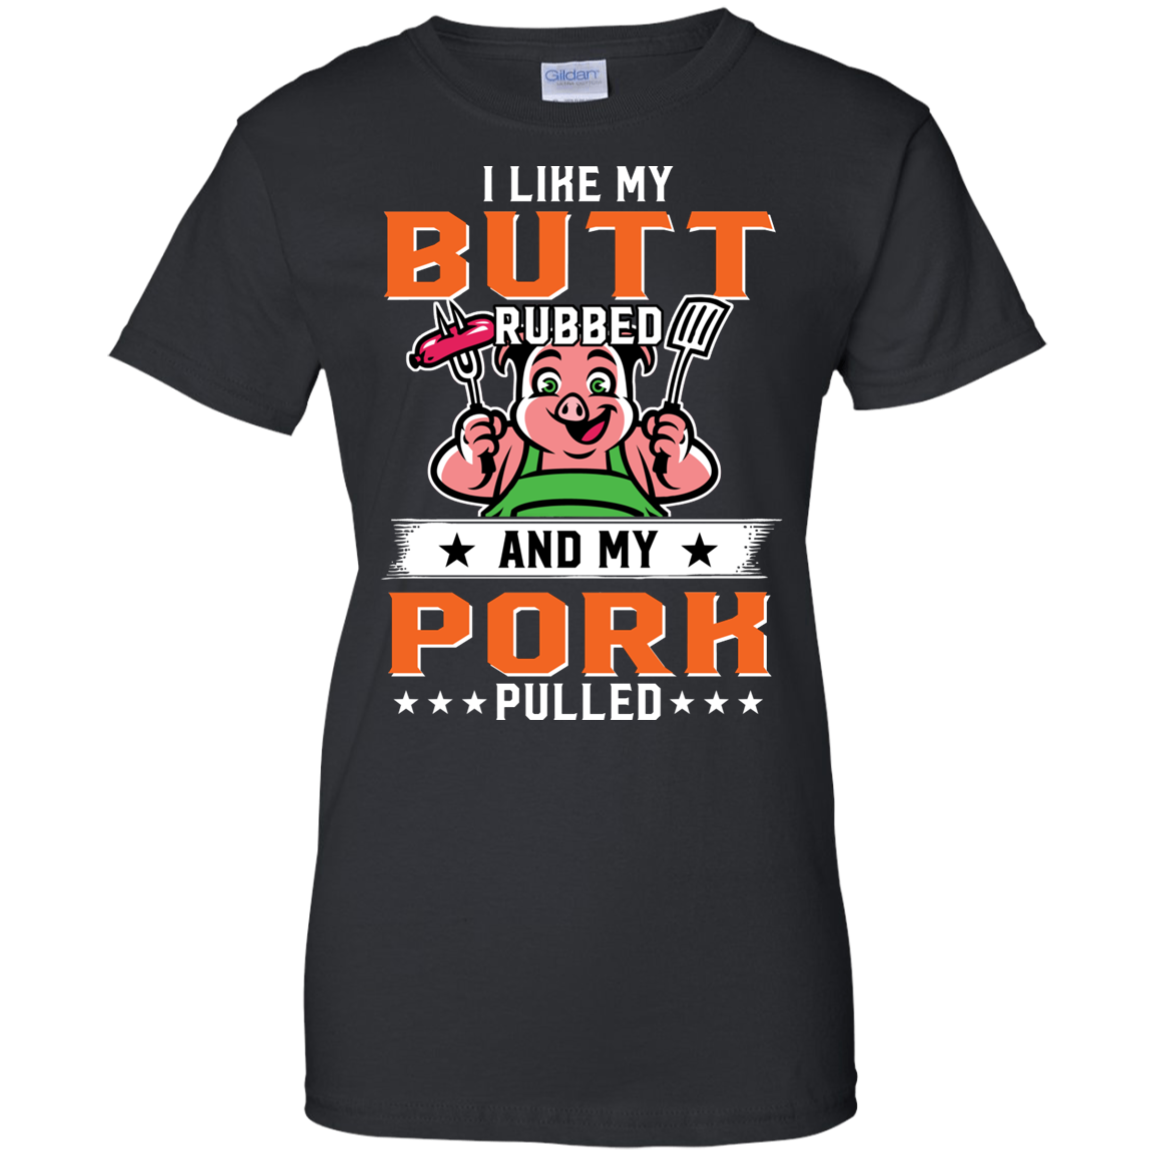 BBQ I Like my Butt Rubbed and my Pork Pulled T-Shirt - Unisex Adult ...